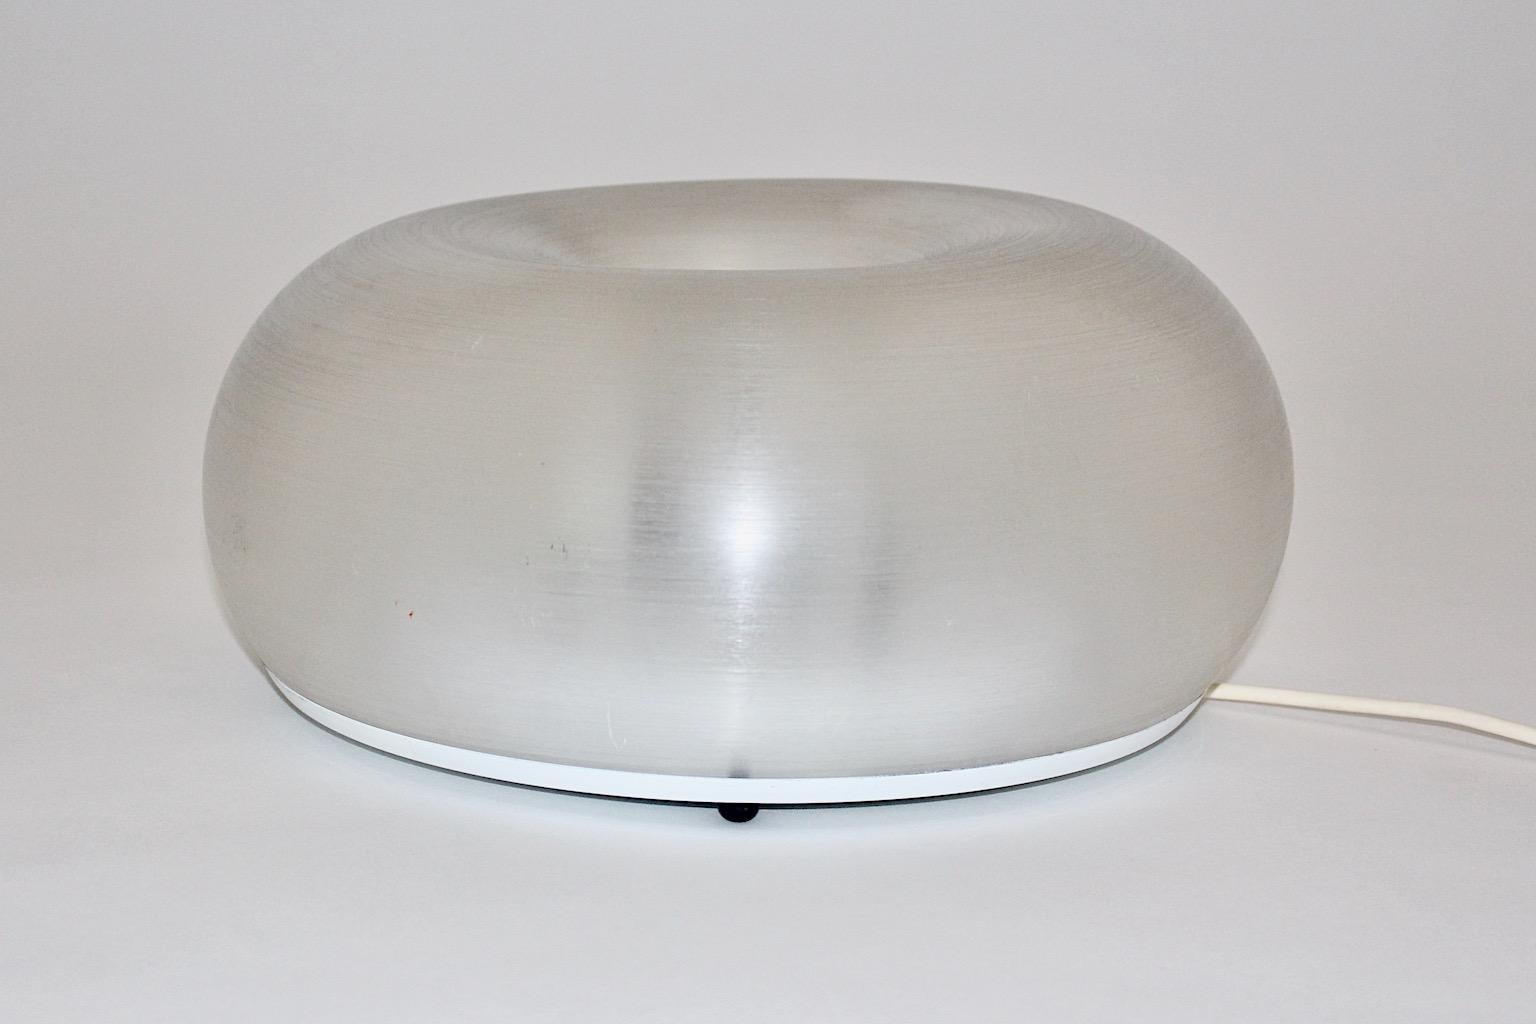 A modern vintage Lucite plexiglass table lamp or sconce, which was designed in Italy, 1980s.
The table lamp or sconce features a round shaped plexiglass shade with chromed metal details, a chromed metal disc deepens in the middle of the lamp.
2 E